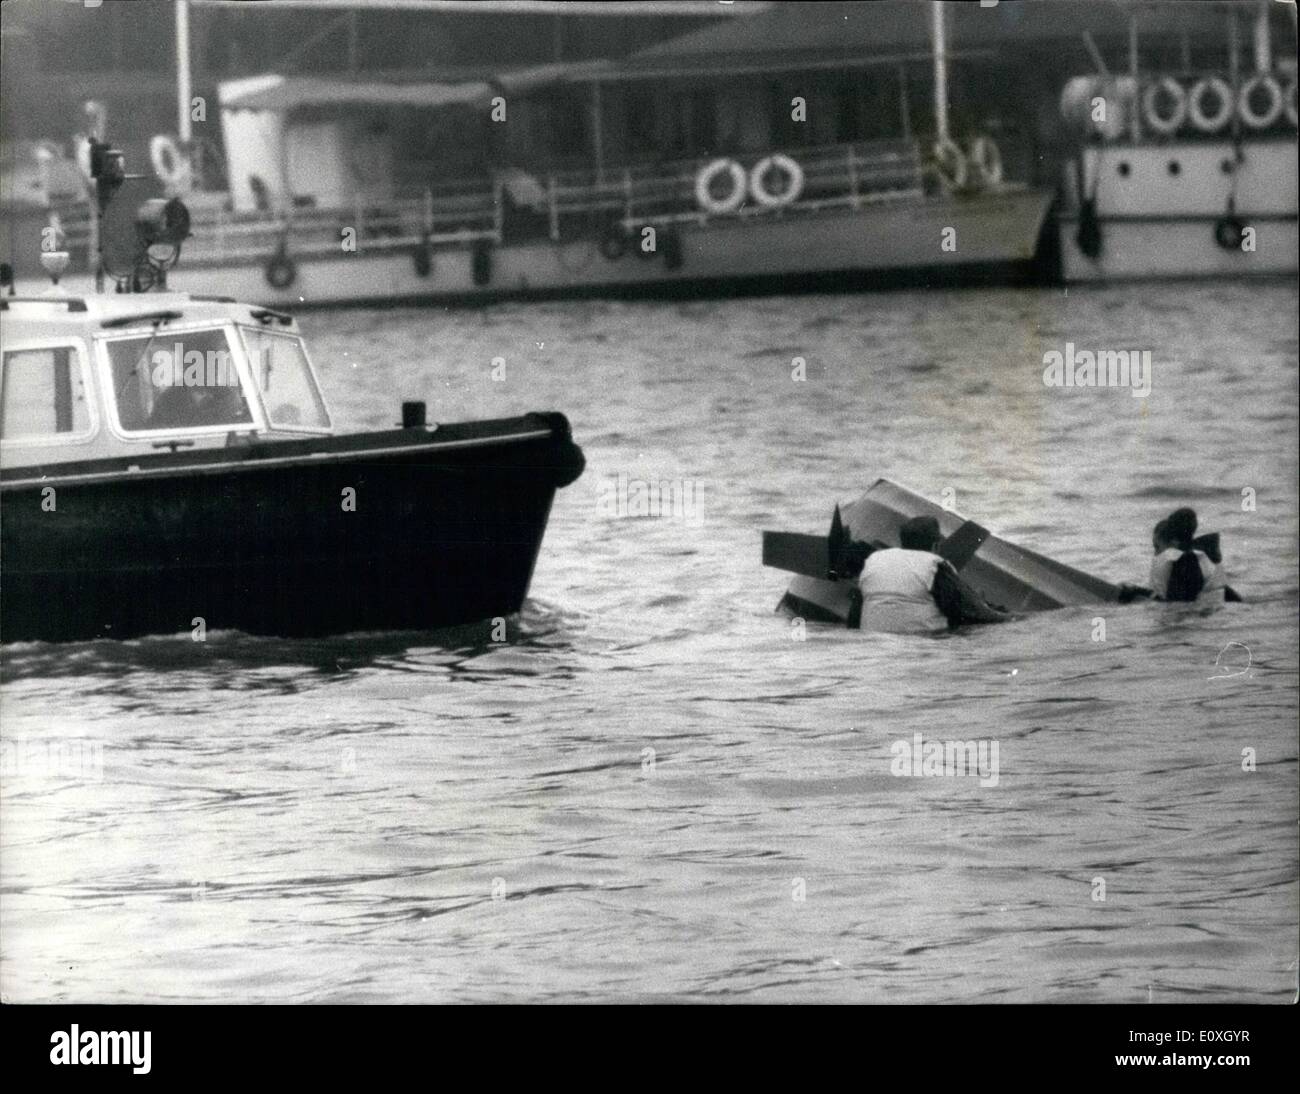 Dec. 12, 1966 - A demonstration Mishap.: Britain was introduced to a new water sport in the heart of London, yesterday, when a two-seater hydrofoil made its debut on the Thames. The new craft is the smallest and cheapest fail riding craft is the smallest and cheapest fail riding craft in the world. Hi-Foiling is a completely new experience in aquativ sport. The craft is less than nine feet long, is powered by an outboard engine and has handle bar steering. it operates liek any other craft up to ten to fifteen miles an hour Stock Photo